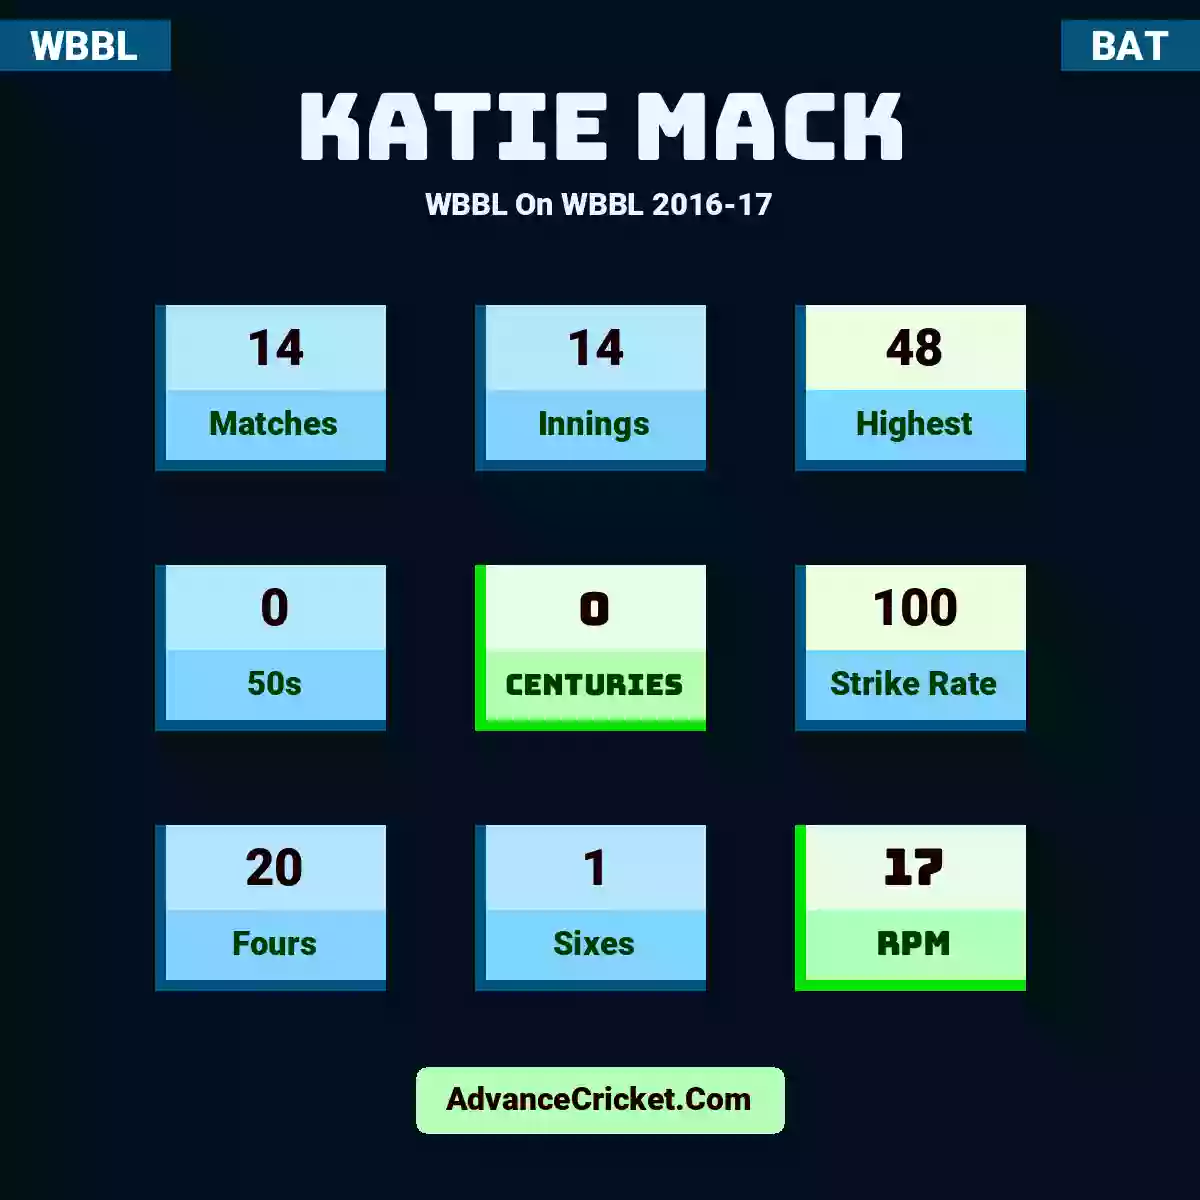 Katie Mack WBBL  On WBBL 2016-17, Katie Mack played 14 matches, scored 48 runs as highest, 0 half-centuries, and 0 centuries, with a strike rate of 100. K.Mack hit 20 fours and 1 sixes, with an RPM of 17.